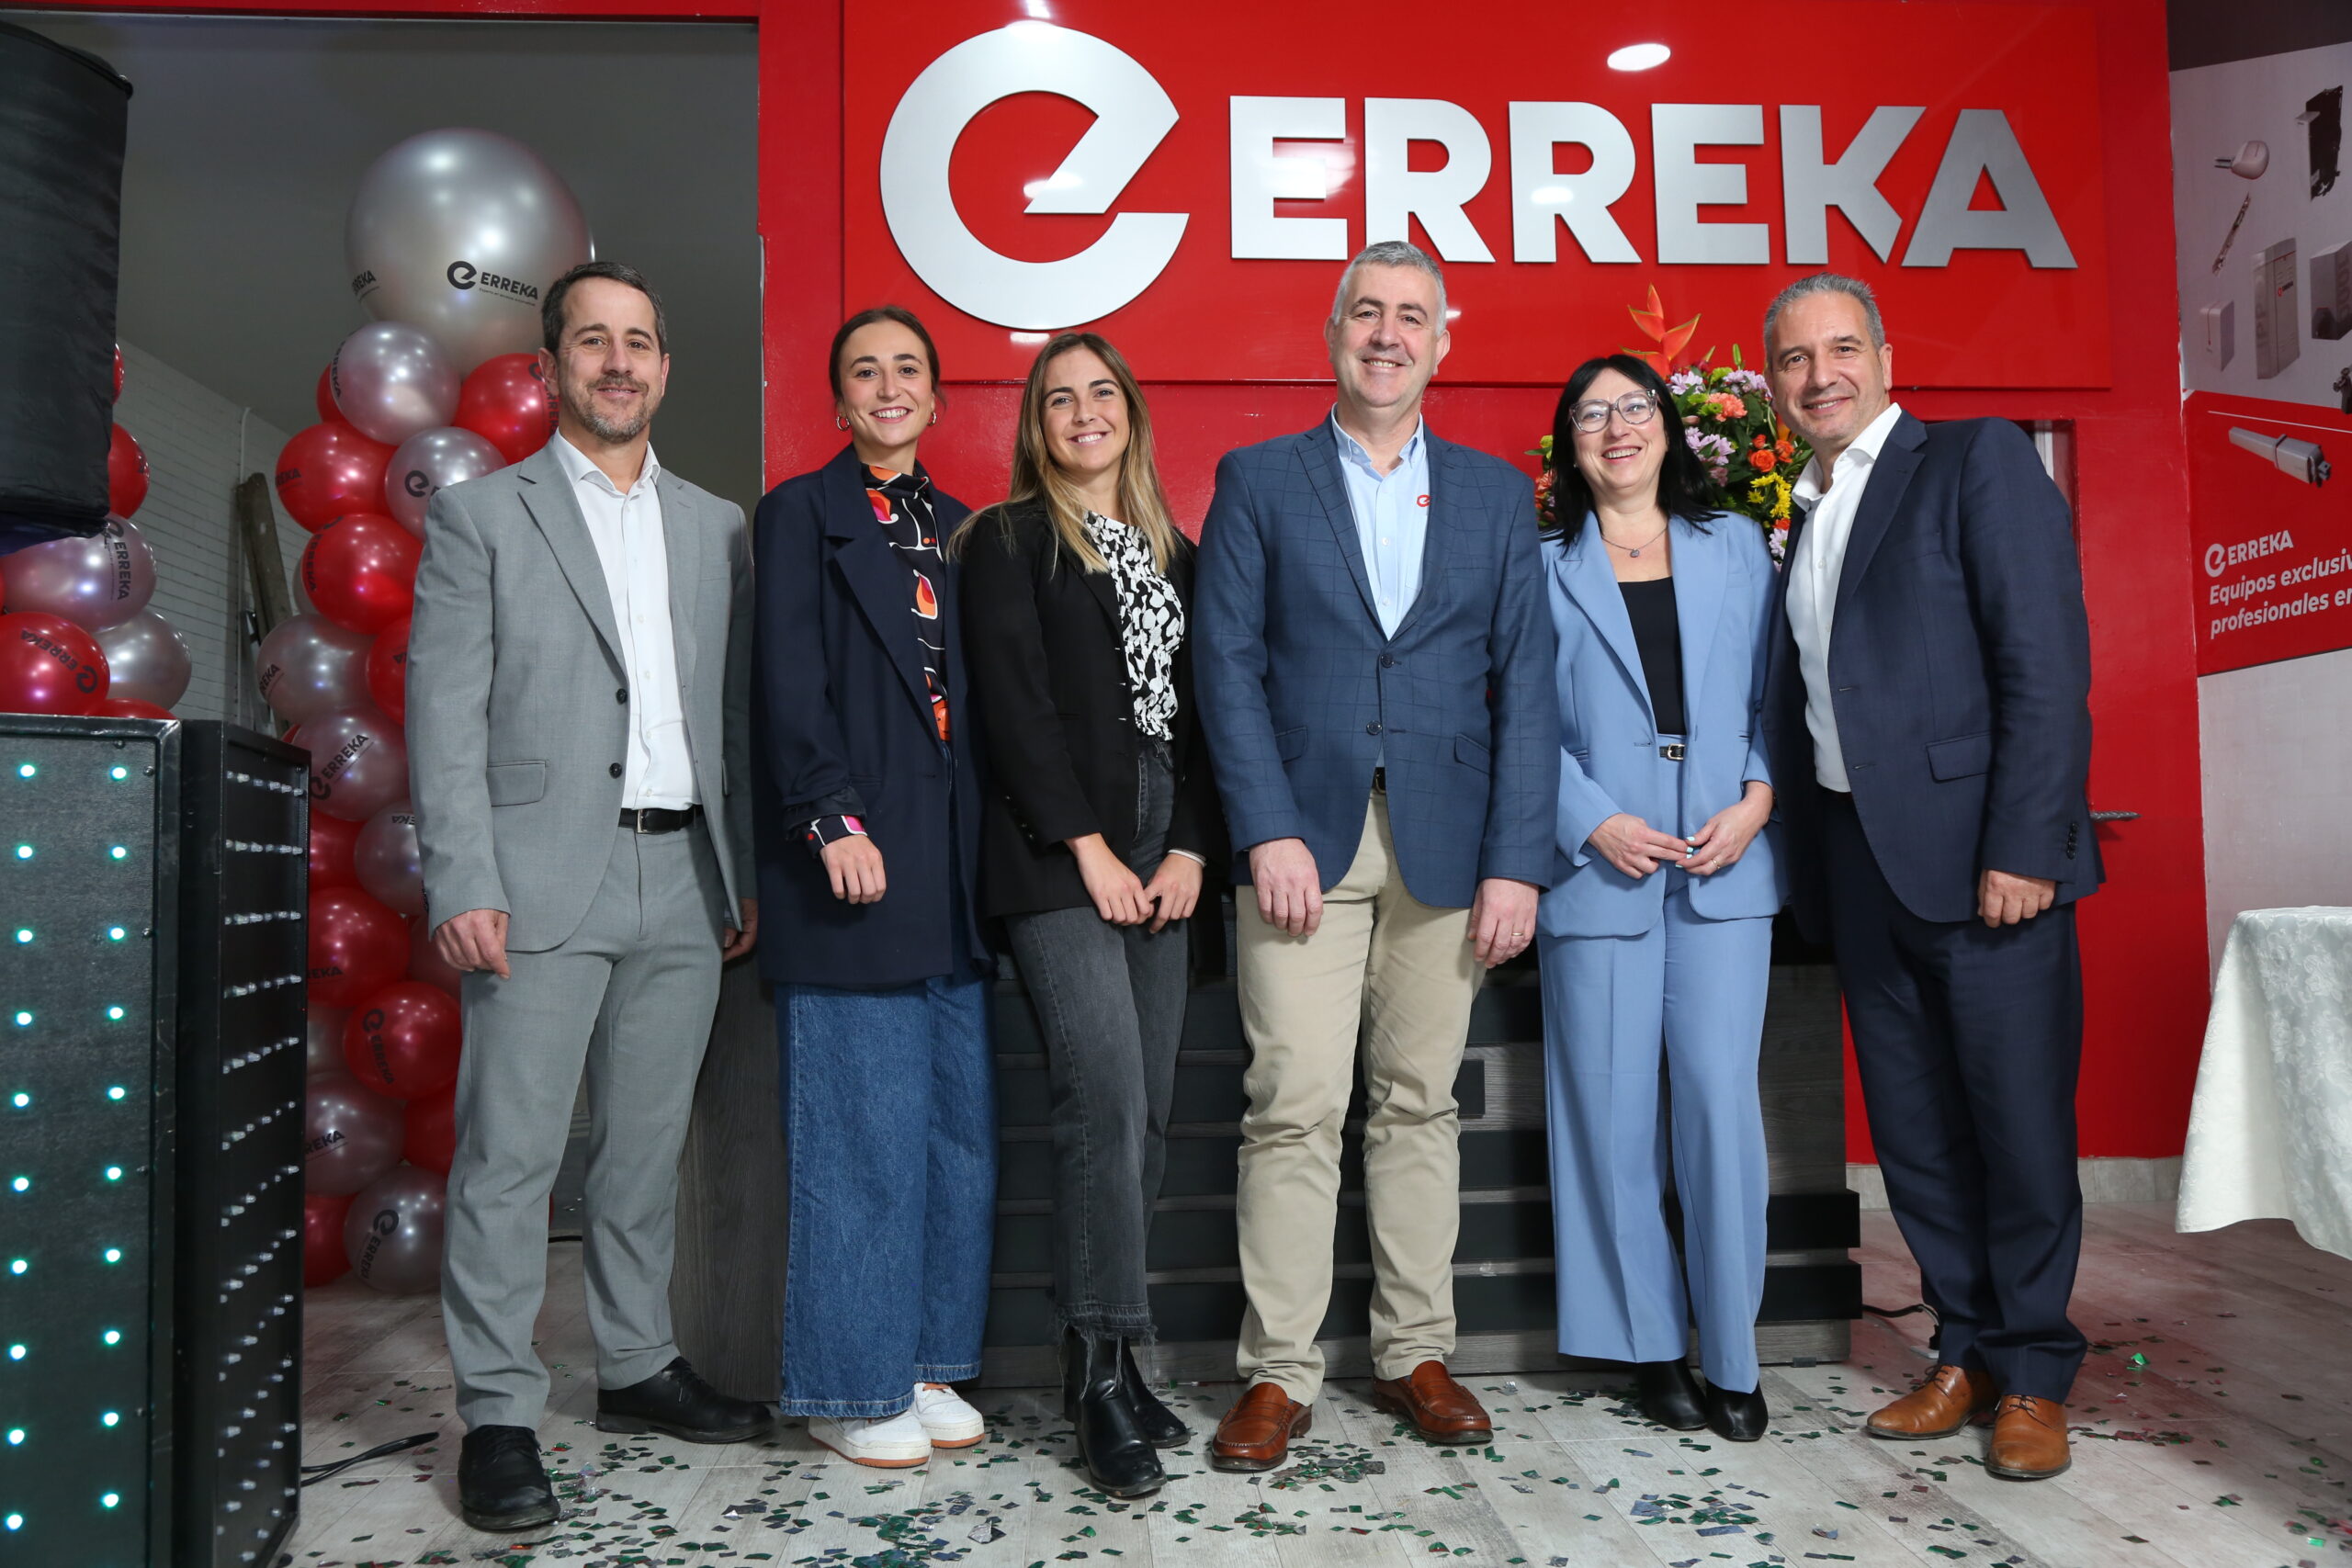 Antton Tomasena, CEO of ERREKA; Aitor Sotés, Director of ERREKA Connected Access; and Aitor Ortiz de Zarate, International Manager, along with representatives from SPRI Colombia.